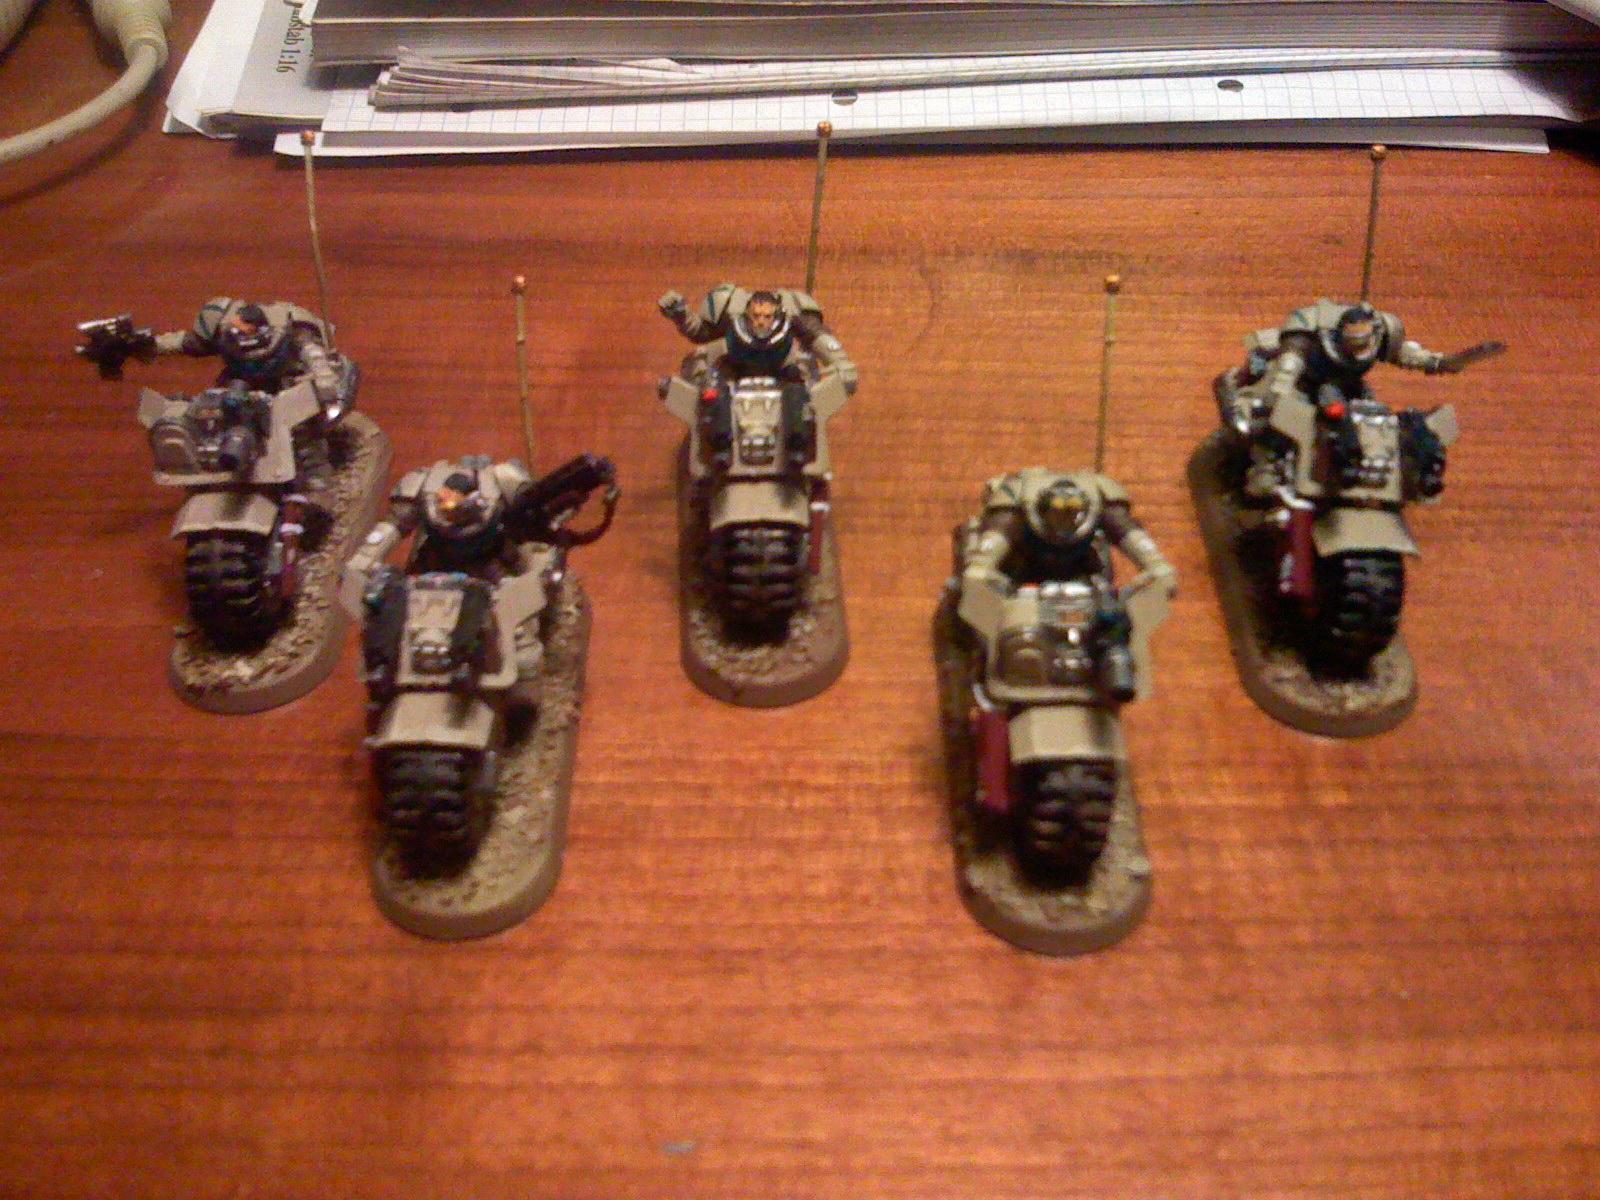 Sand Vipers, Scout Bikes, Space Marines, Warhammer 40,000